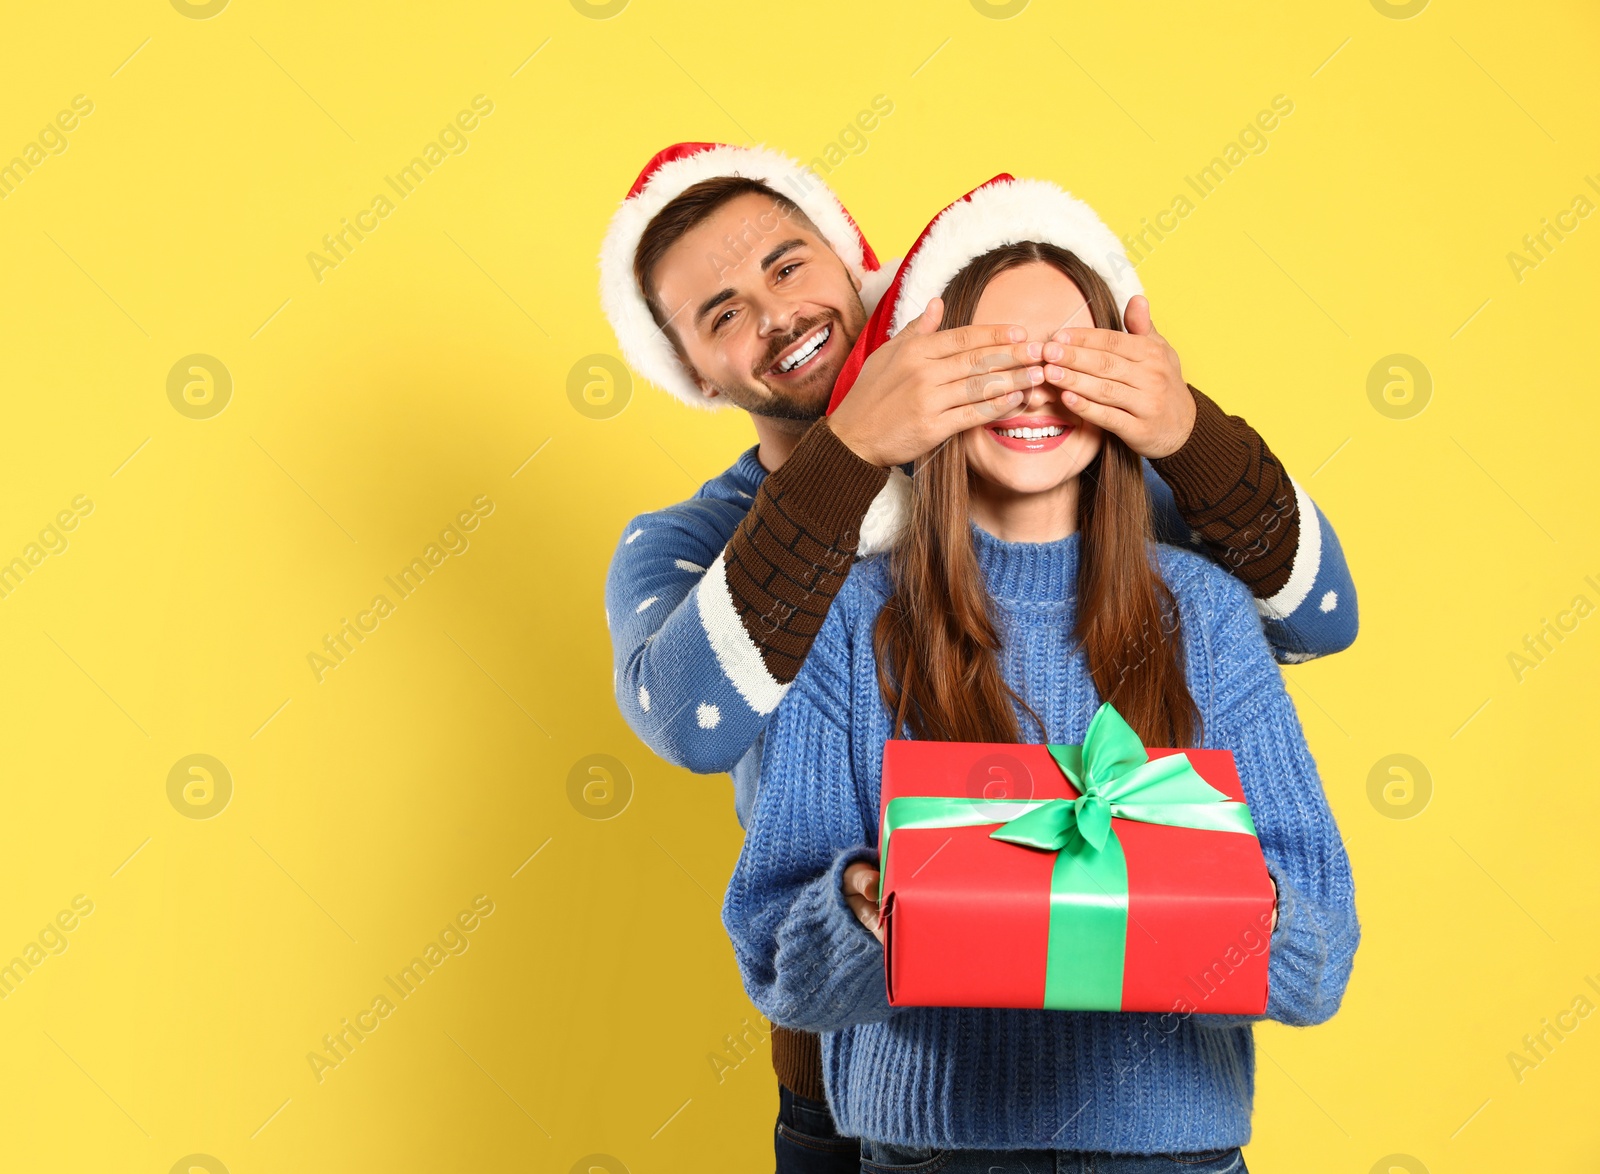 Photo of Couple wearing Christmas sweaters and Santa hats on yellow background